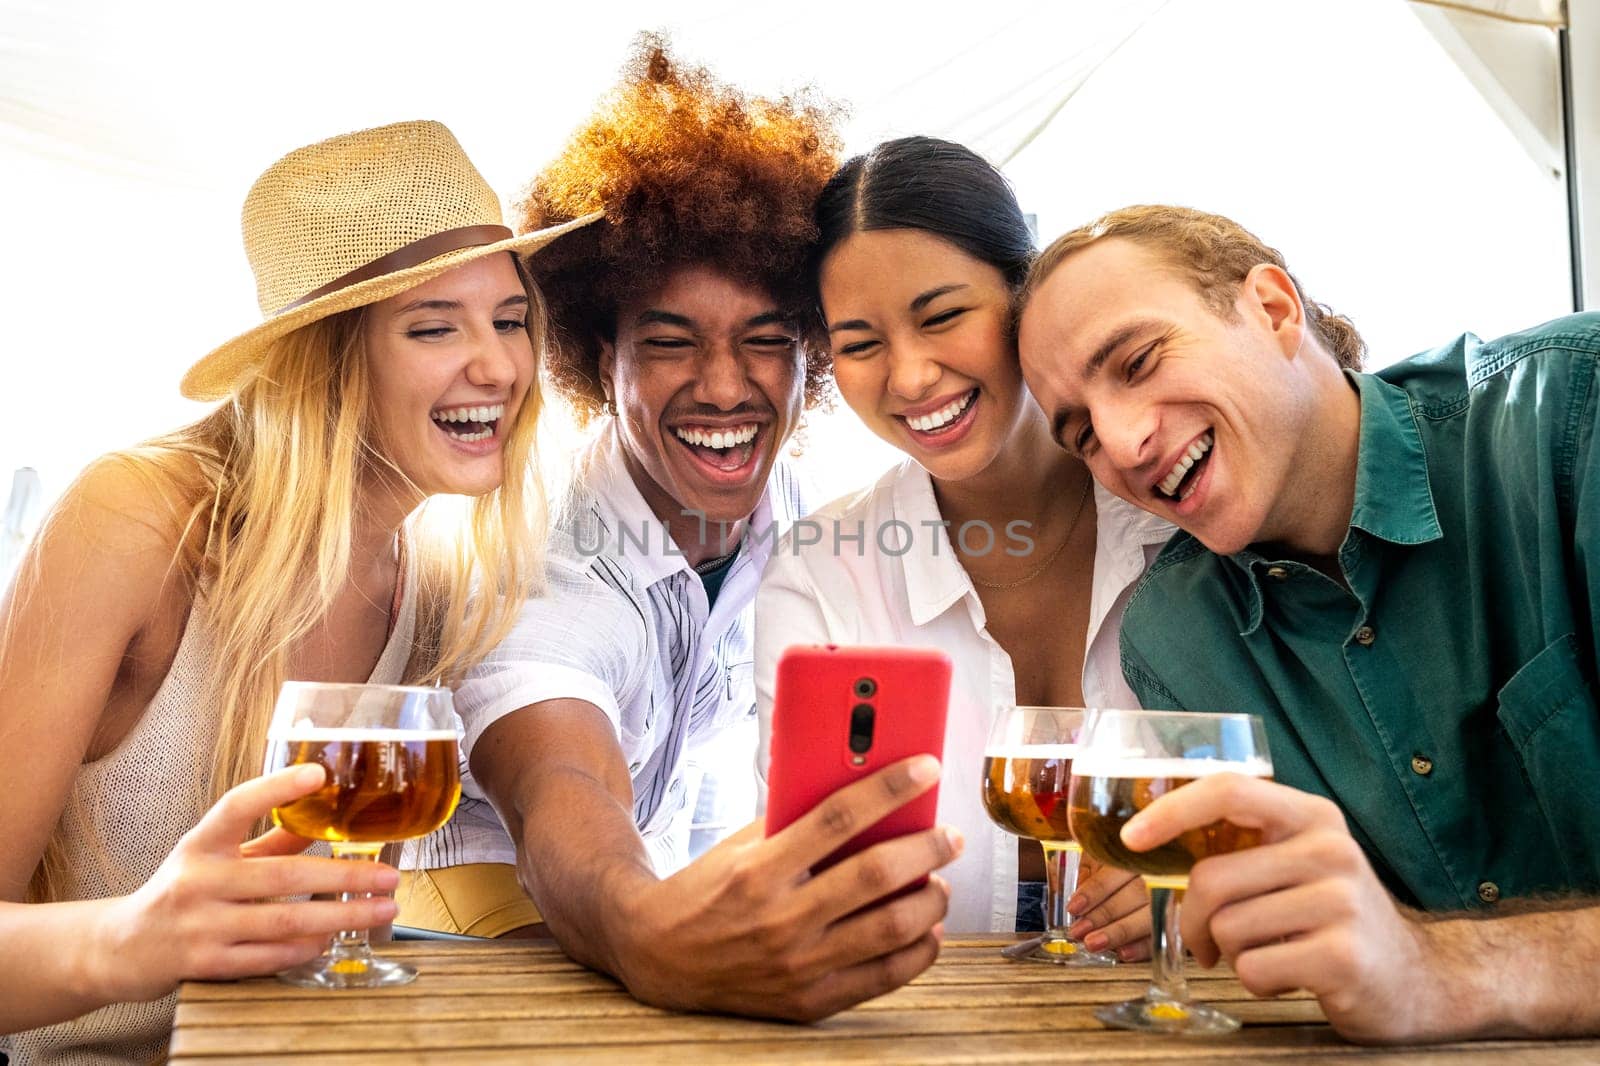 Group of happy multiracial friends looking at mobile phone in a beach bar while drinking beer. Friends on a video call using phone. Taking selfie. Technology and leisure activity.